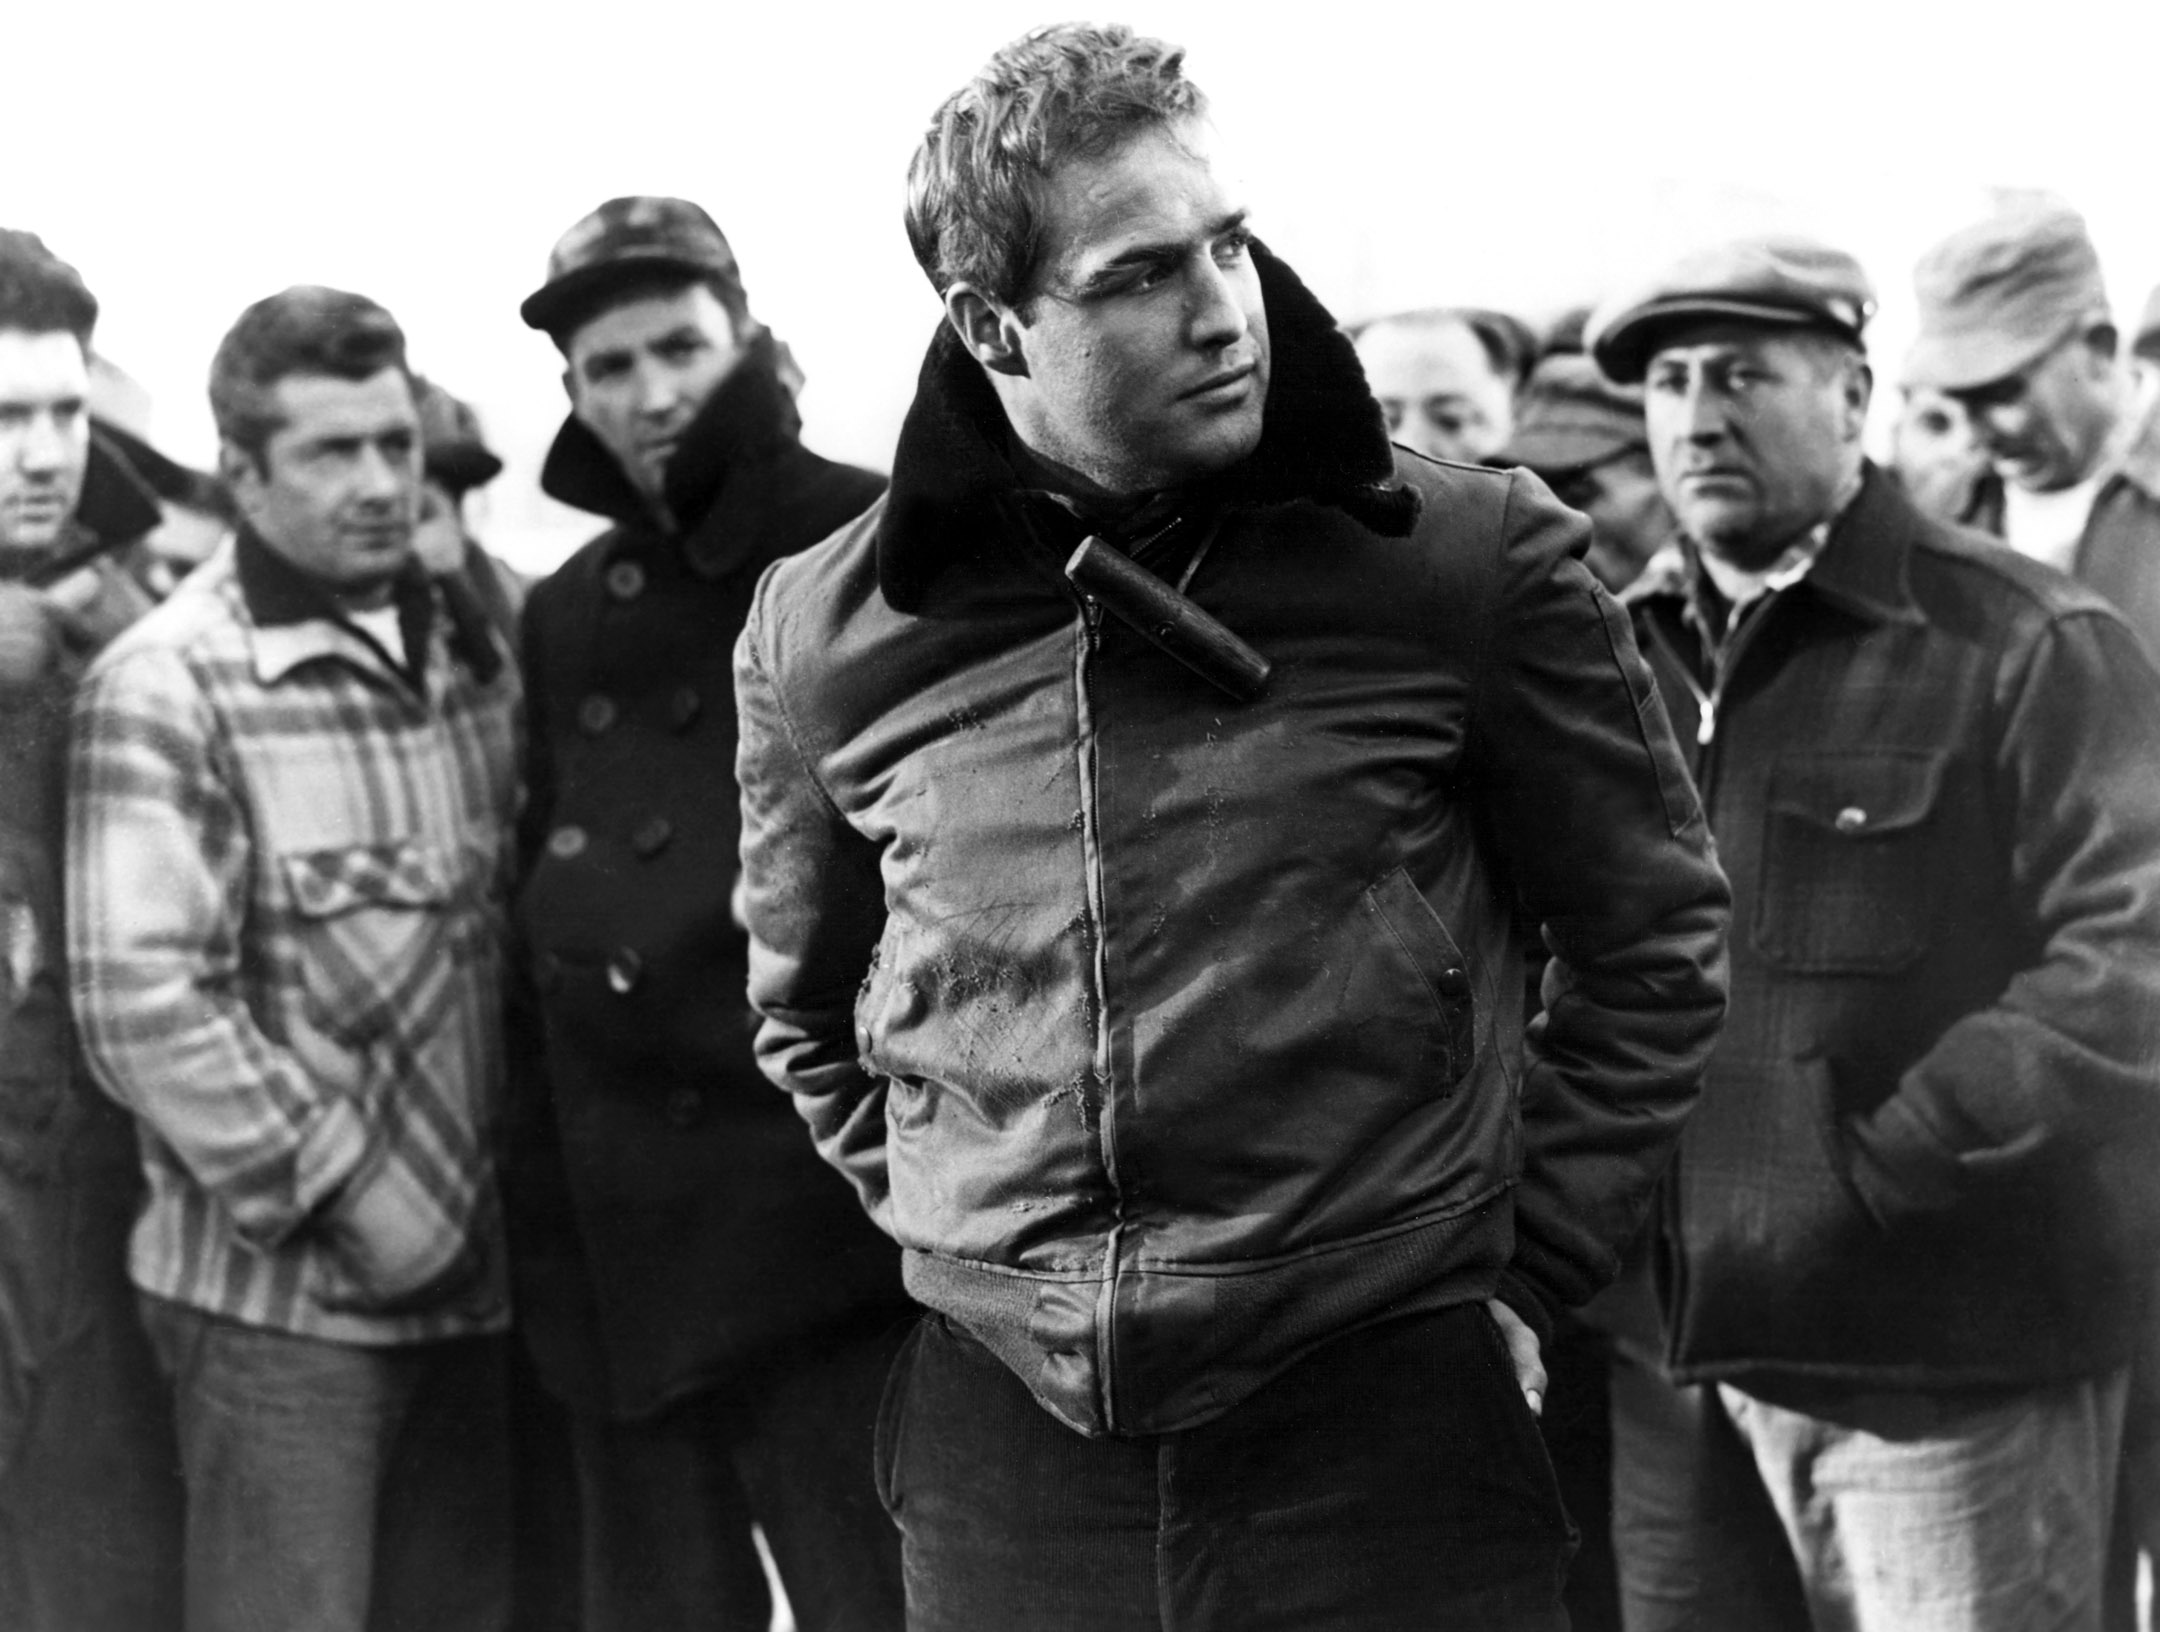 On The Waterfront (1954) - This crime-drama set on the waterfront of a busy port in New Jersey, Marlon Brando plays Terry Malloy, a down on his luck dockworker who was and ex-boxer. This film was Brando’s second collaboration with director Elia Kazan and was well received upon release. Brando’s famous line, "You don't understand! I coulda had class. I coulda been a contender. I coulda been somebody instead of a bum, which is what I am” is ranked number three in the greatest movie lines of all time.